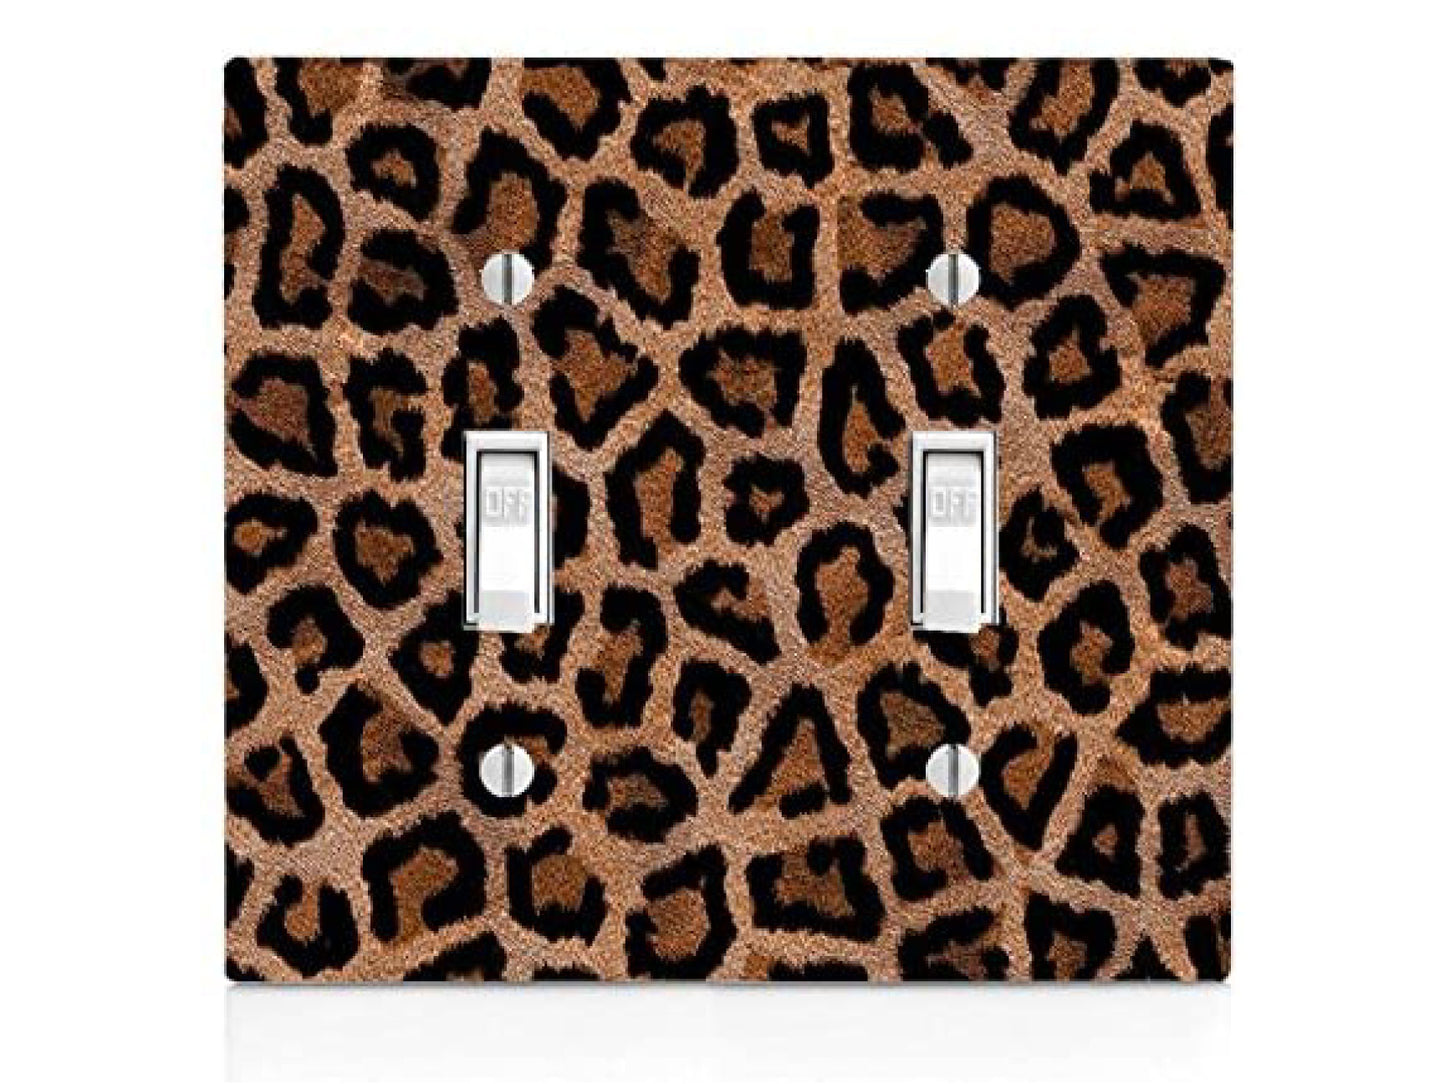 Leopard Print, Plastic Double Gang Toggle Light Switch Wall Plate, Brown Black, 4.75 x 4.75 inches